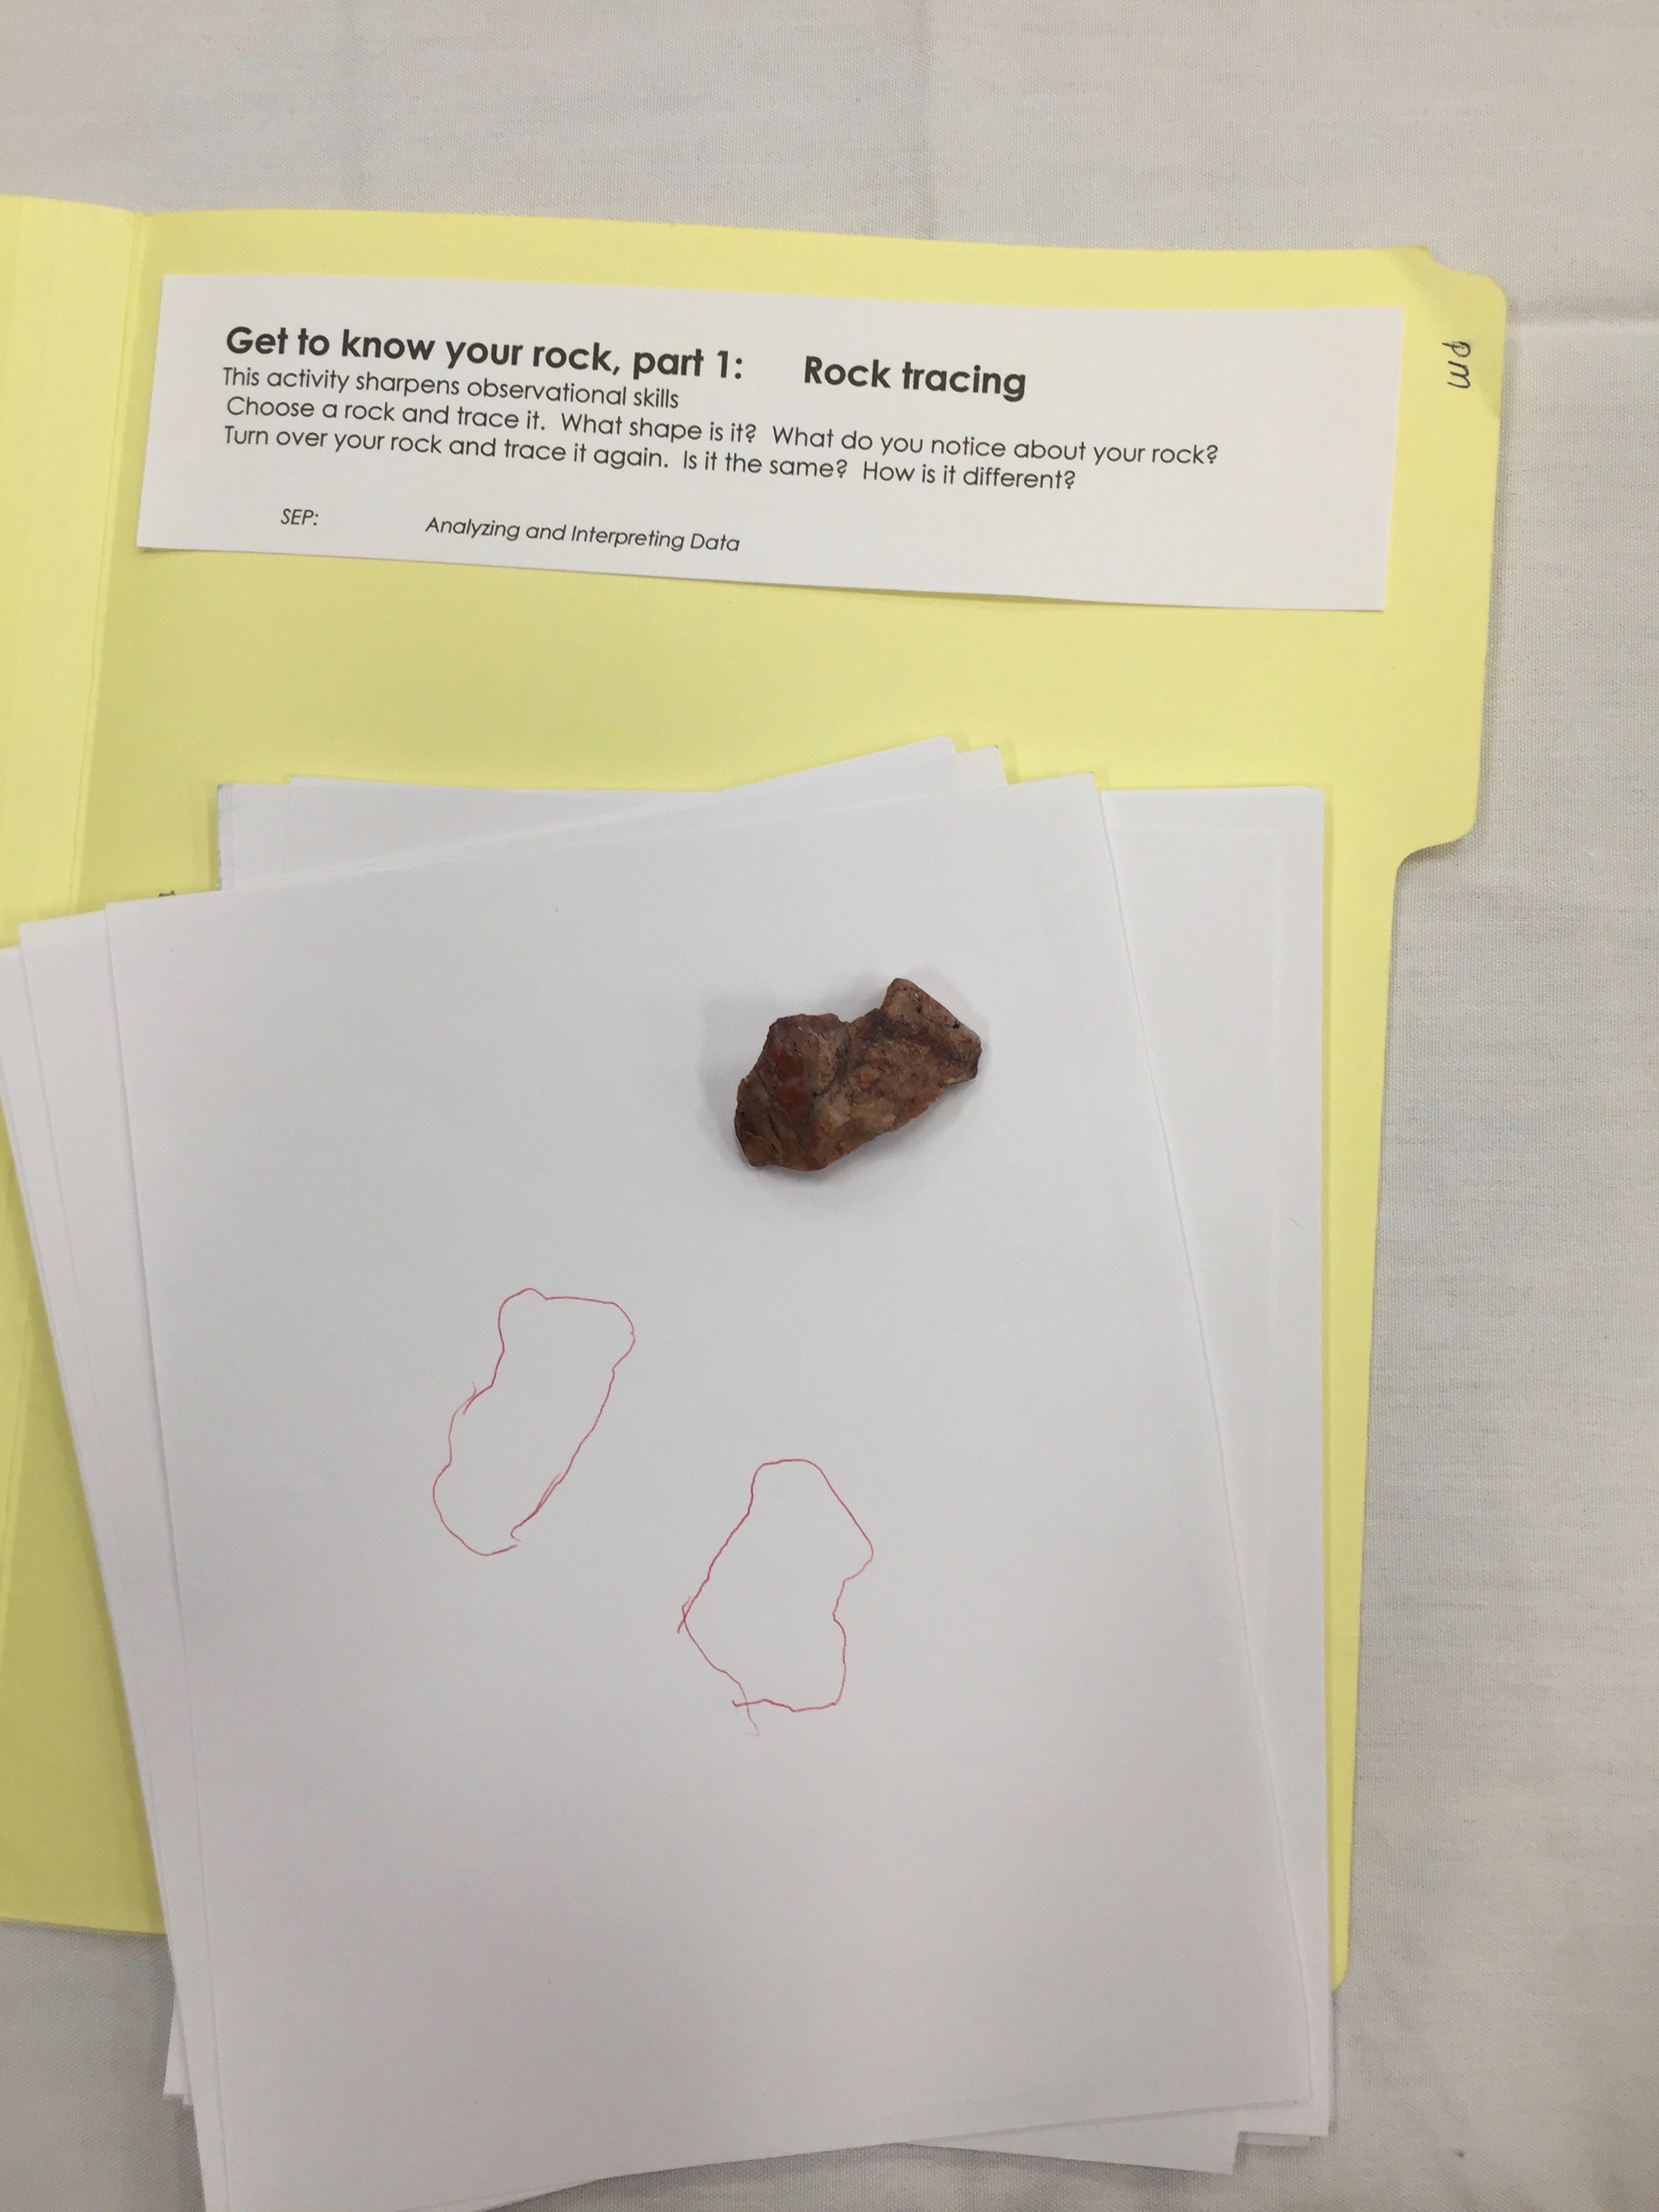 Trace a rock, turn it over and trace it again. Becoming familiar with a rock and using spatial ability.